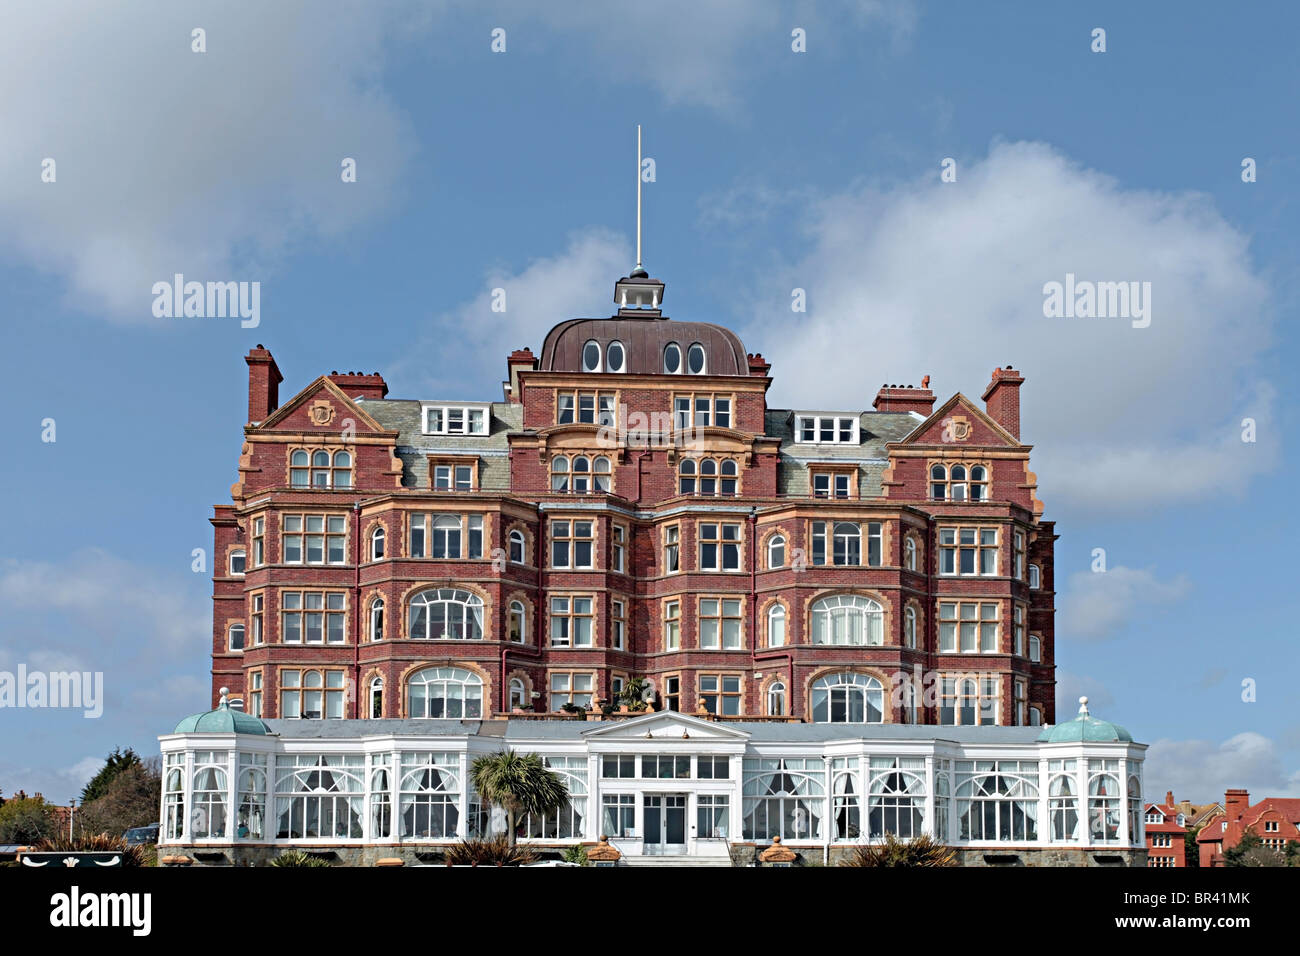 A grand and elegant seafront hotel building in Folkestone, Kent, UK. Stock Photo